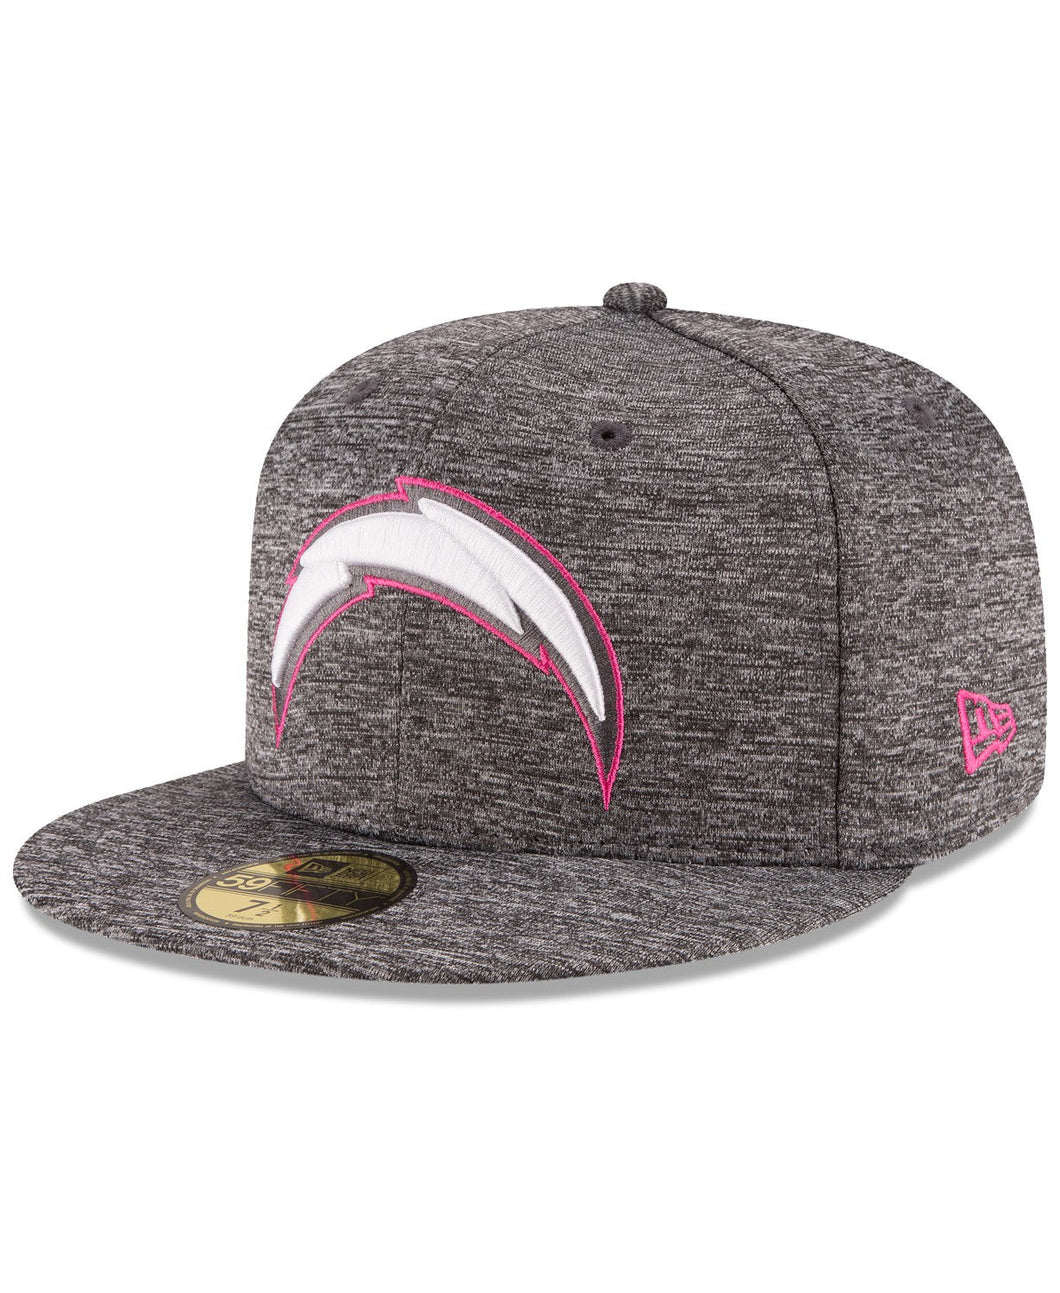 San Diego Chargers New Era NFL 59FIFTY 5950 Fitted Breast Cancer Awareness Cap Hat Heather Gray Crown/Visor White/Pink Logo